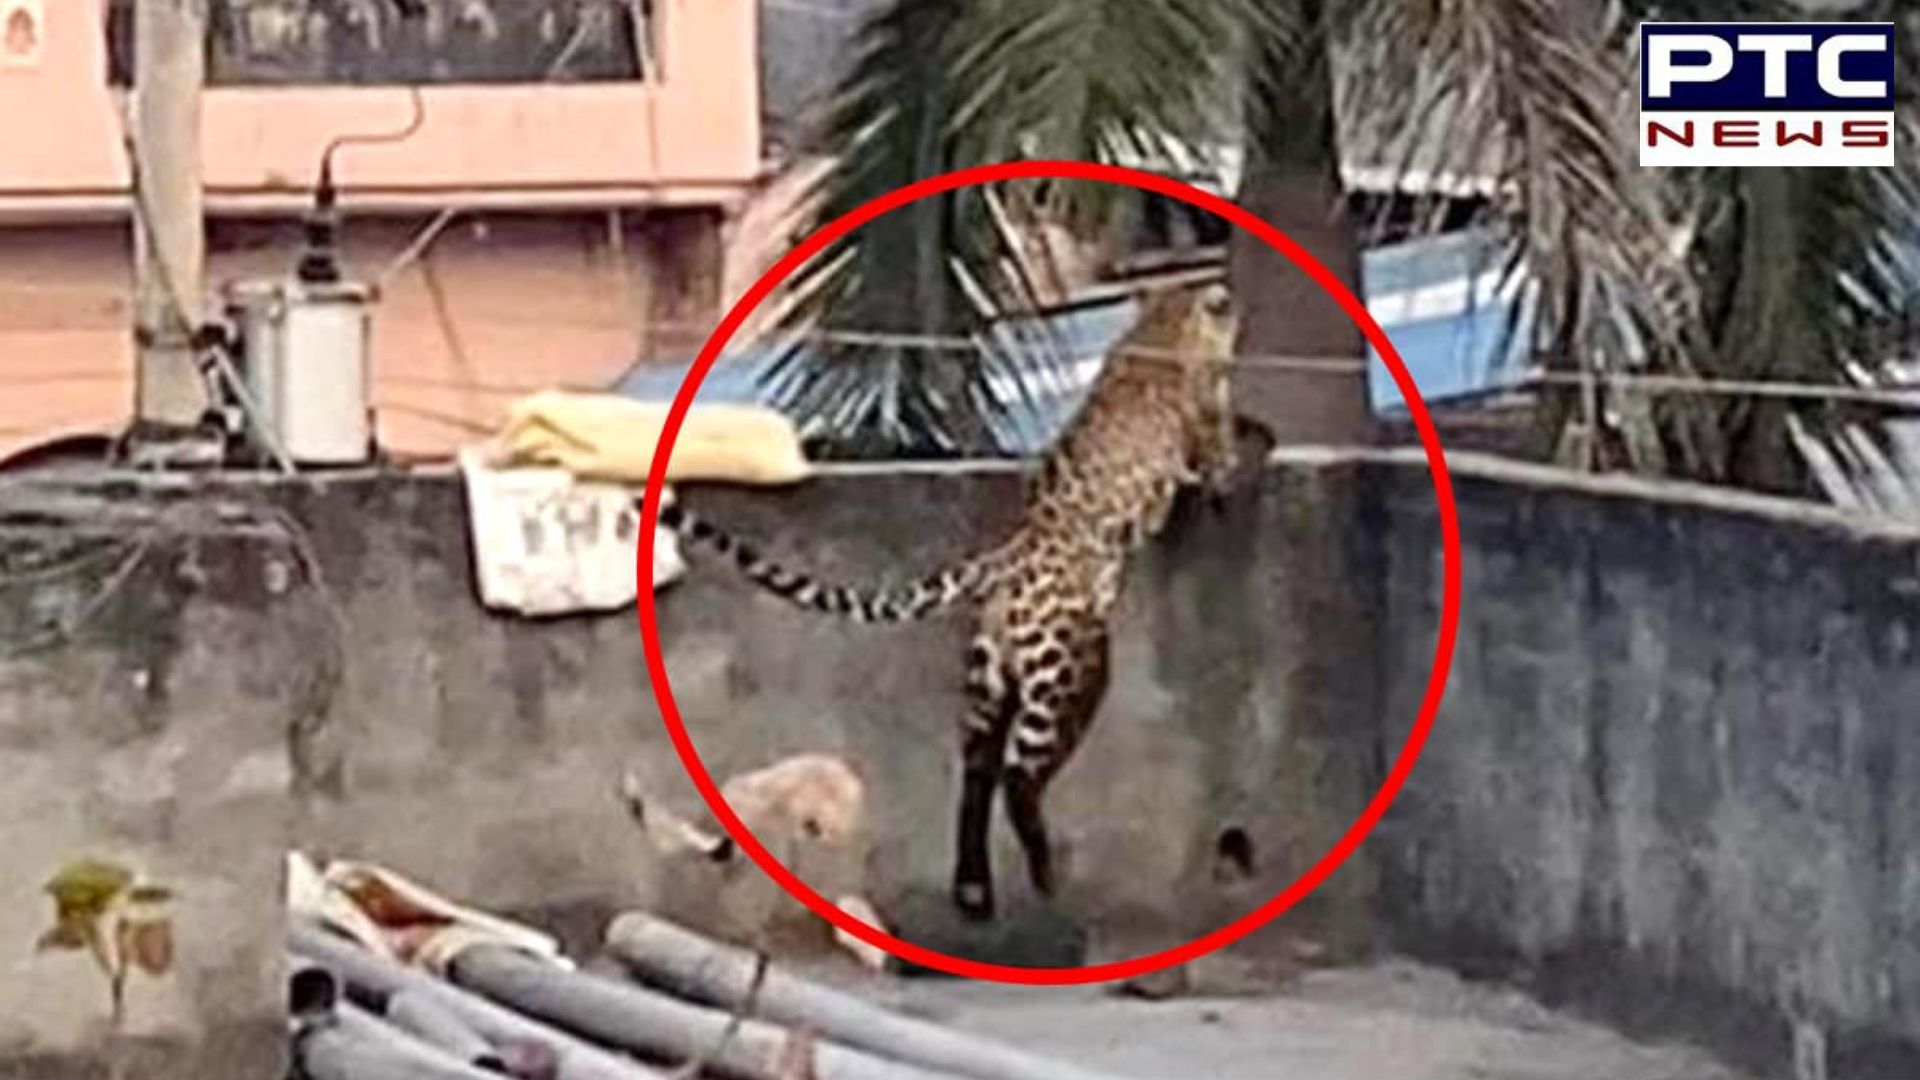 Delhi: 5 injured as leopard enters residential area in Wazirabad; rescue ops underway